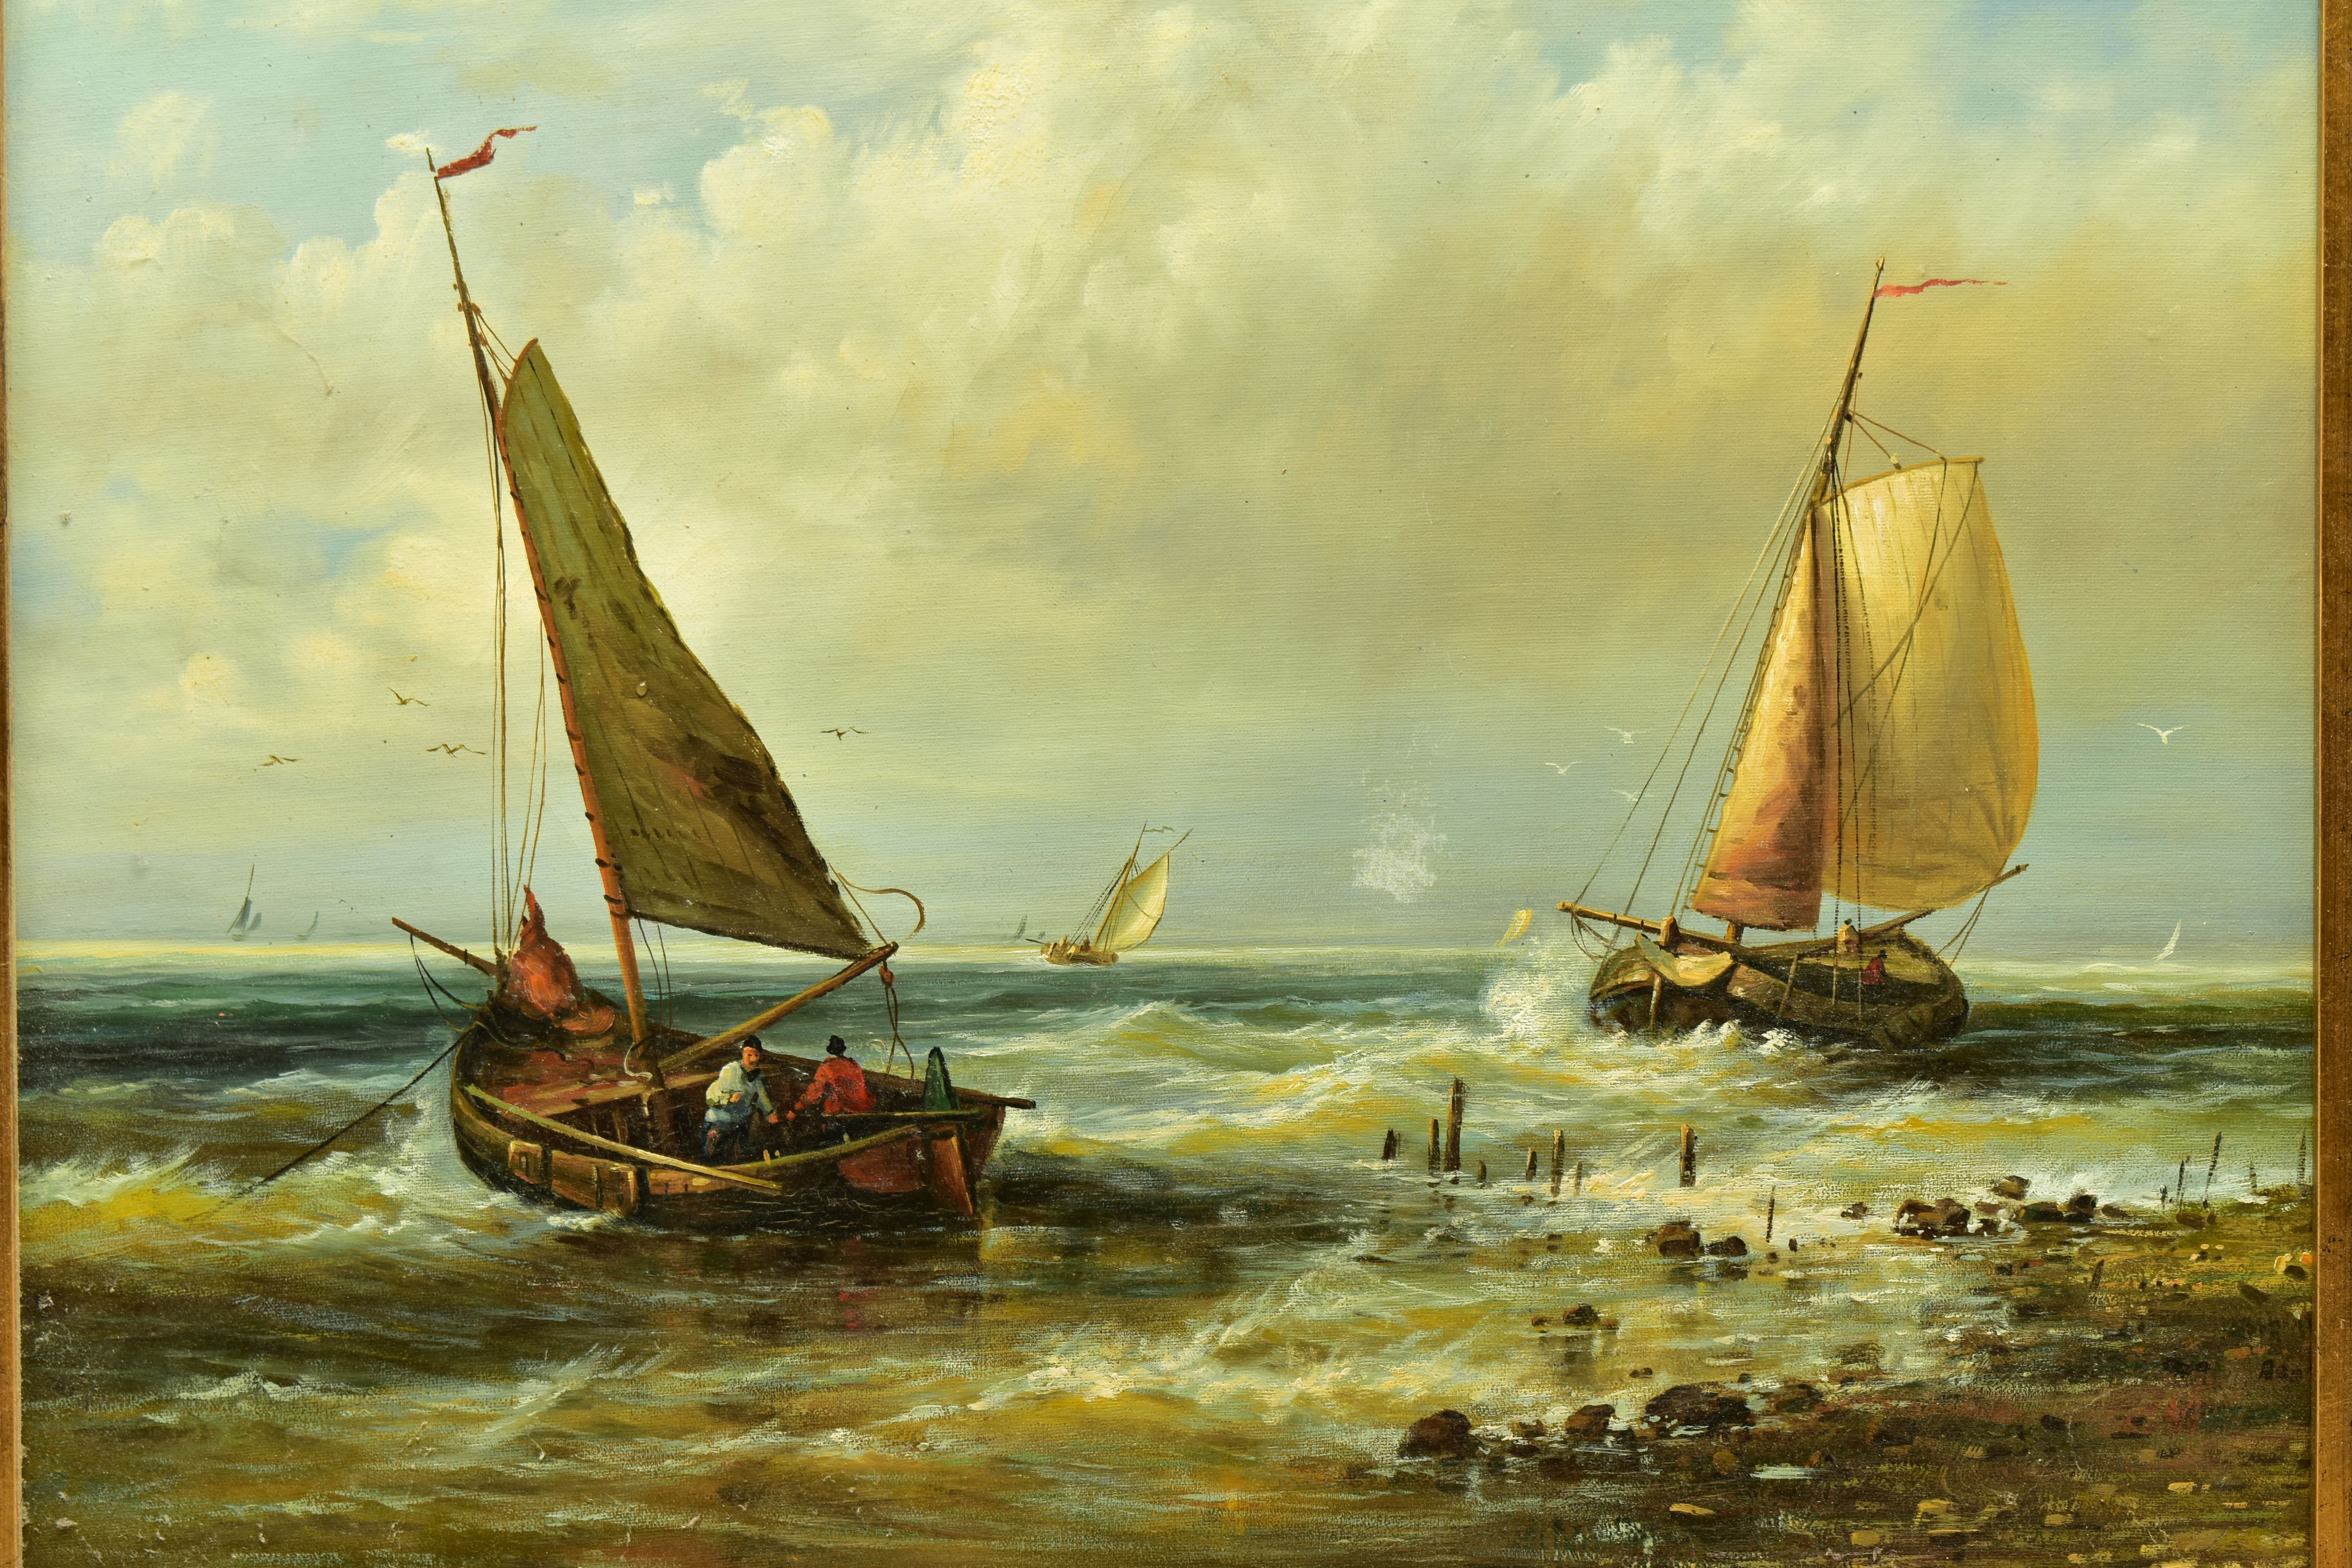 G MURPHY (20TH CENTURY) A NOSTALGIC MARITIME SCENE PAINTED IN A 19TH CENTURY STYLE, depicting - Image 2 of 7